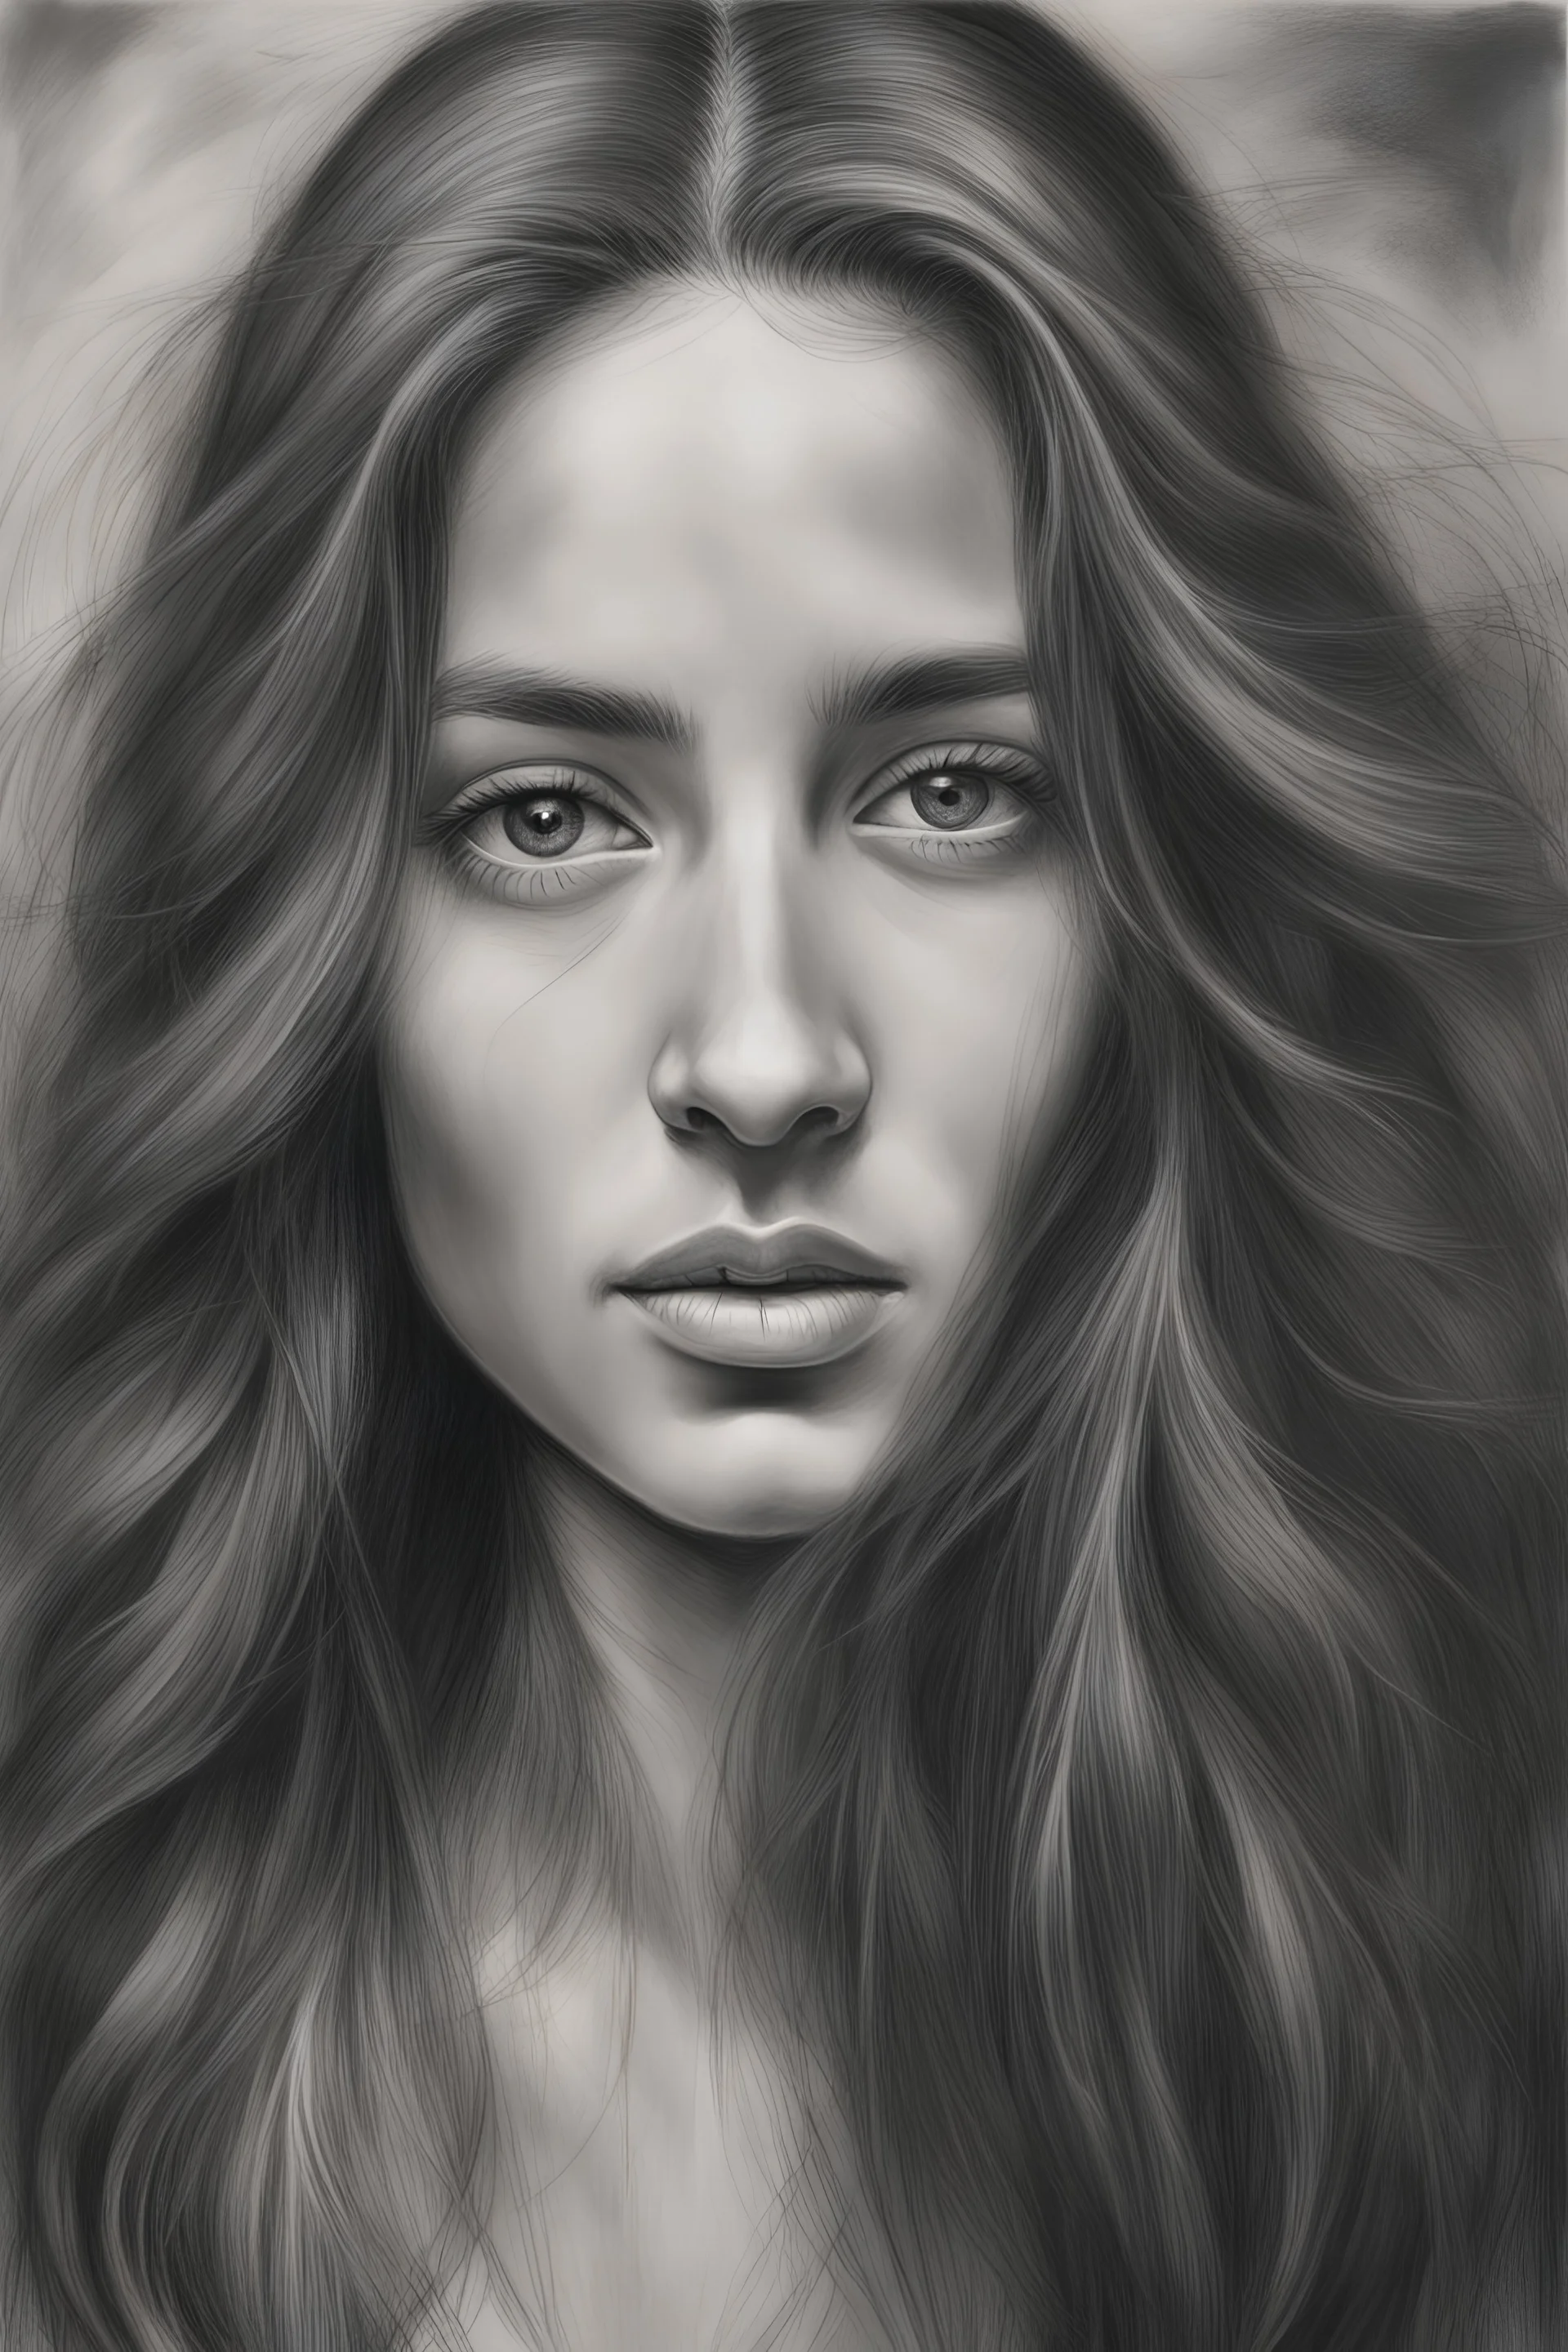 The image is a black and white charcoal painting of a woman with long hair. The artist has skillfully captured the woman's features, including her eyes, nose, and mouth, as well as her hair and clothing. The painting is a close-up of the woman's face, focusing on her expression and the intricate details of her features. The charcoal medium adds a sense of depth and texture to the portrait, emphasizing the artist's talent in creating a lifelike representation of the subject.